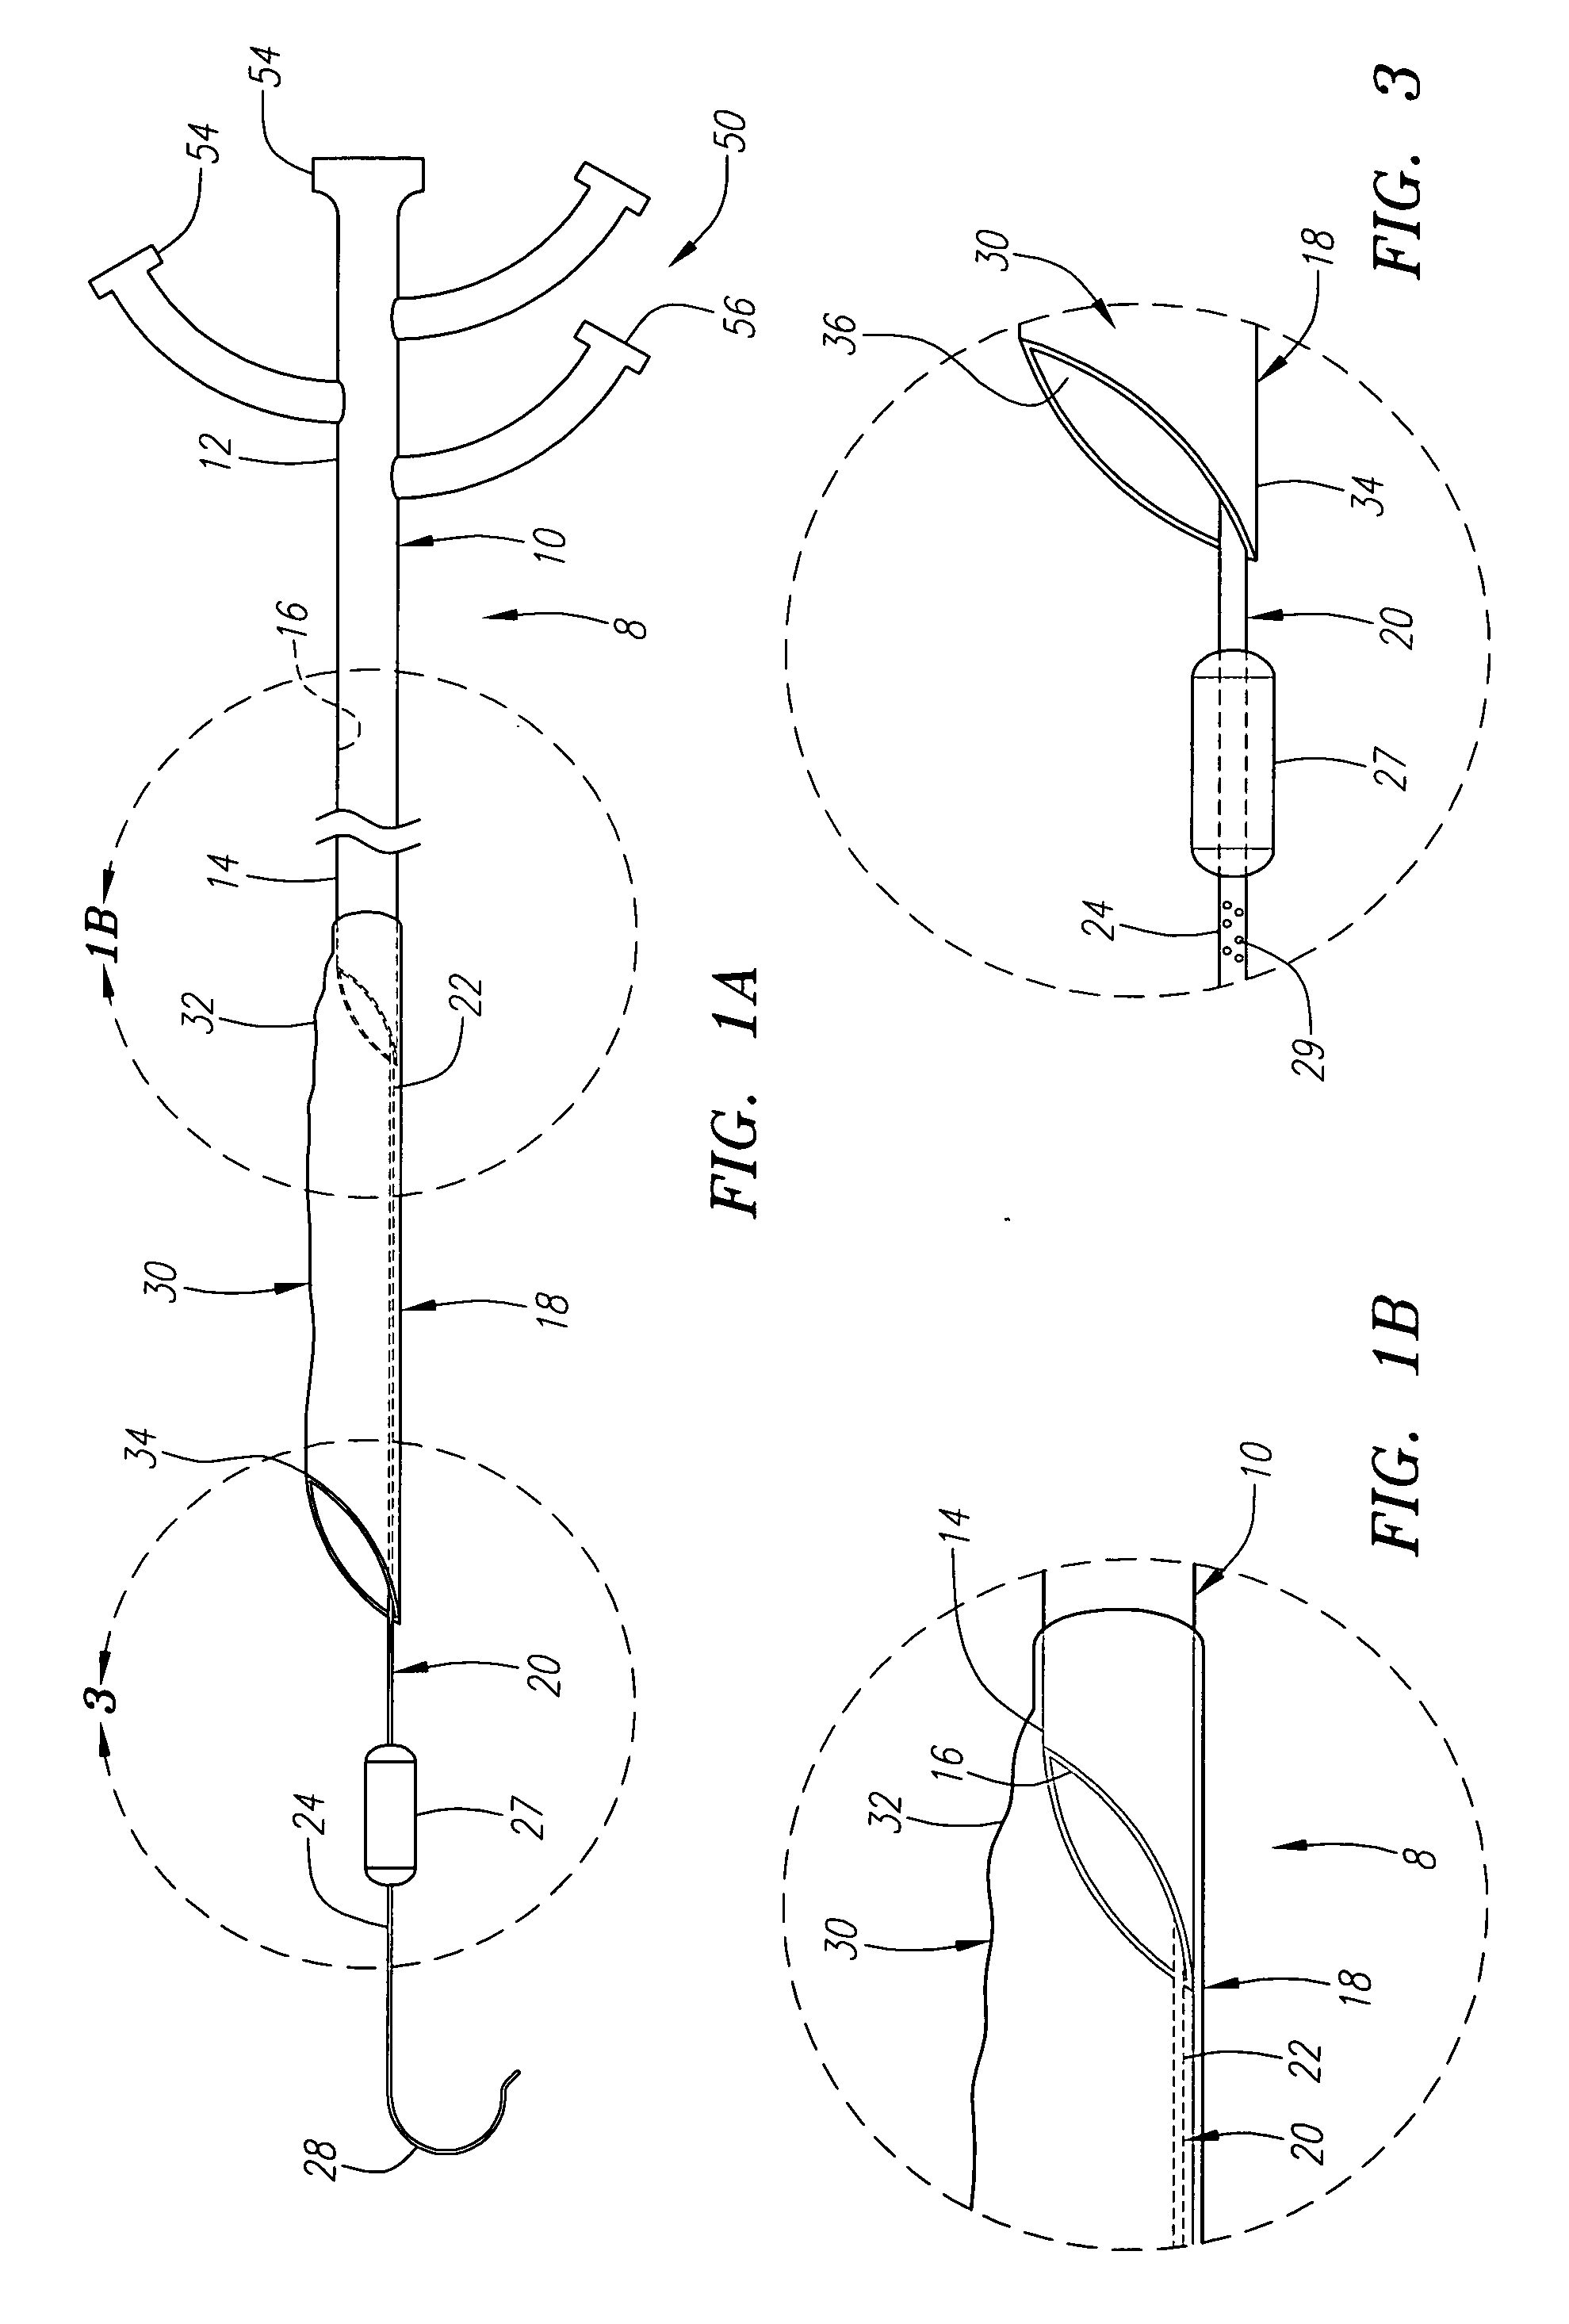 Expandable guide sheath with steerable backbone and methods for making and using them